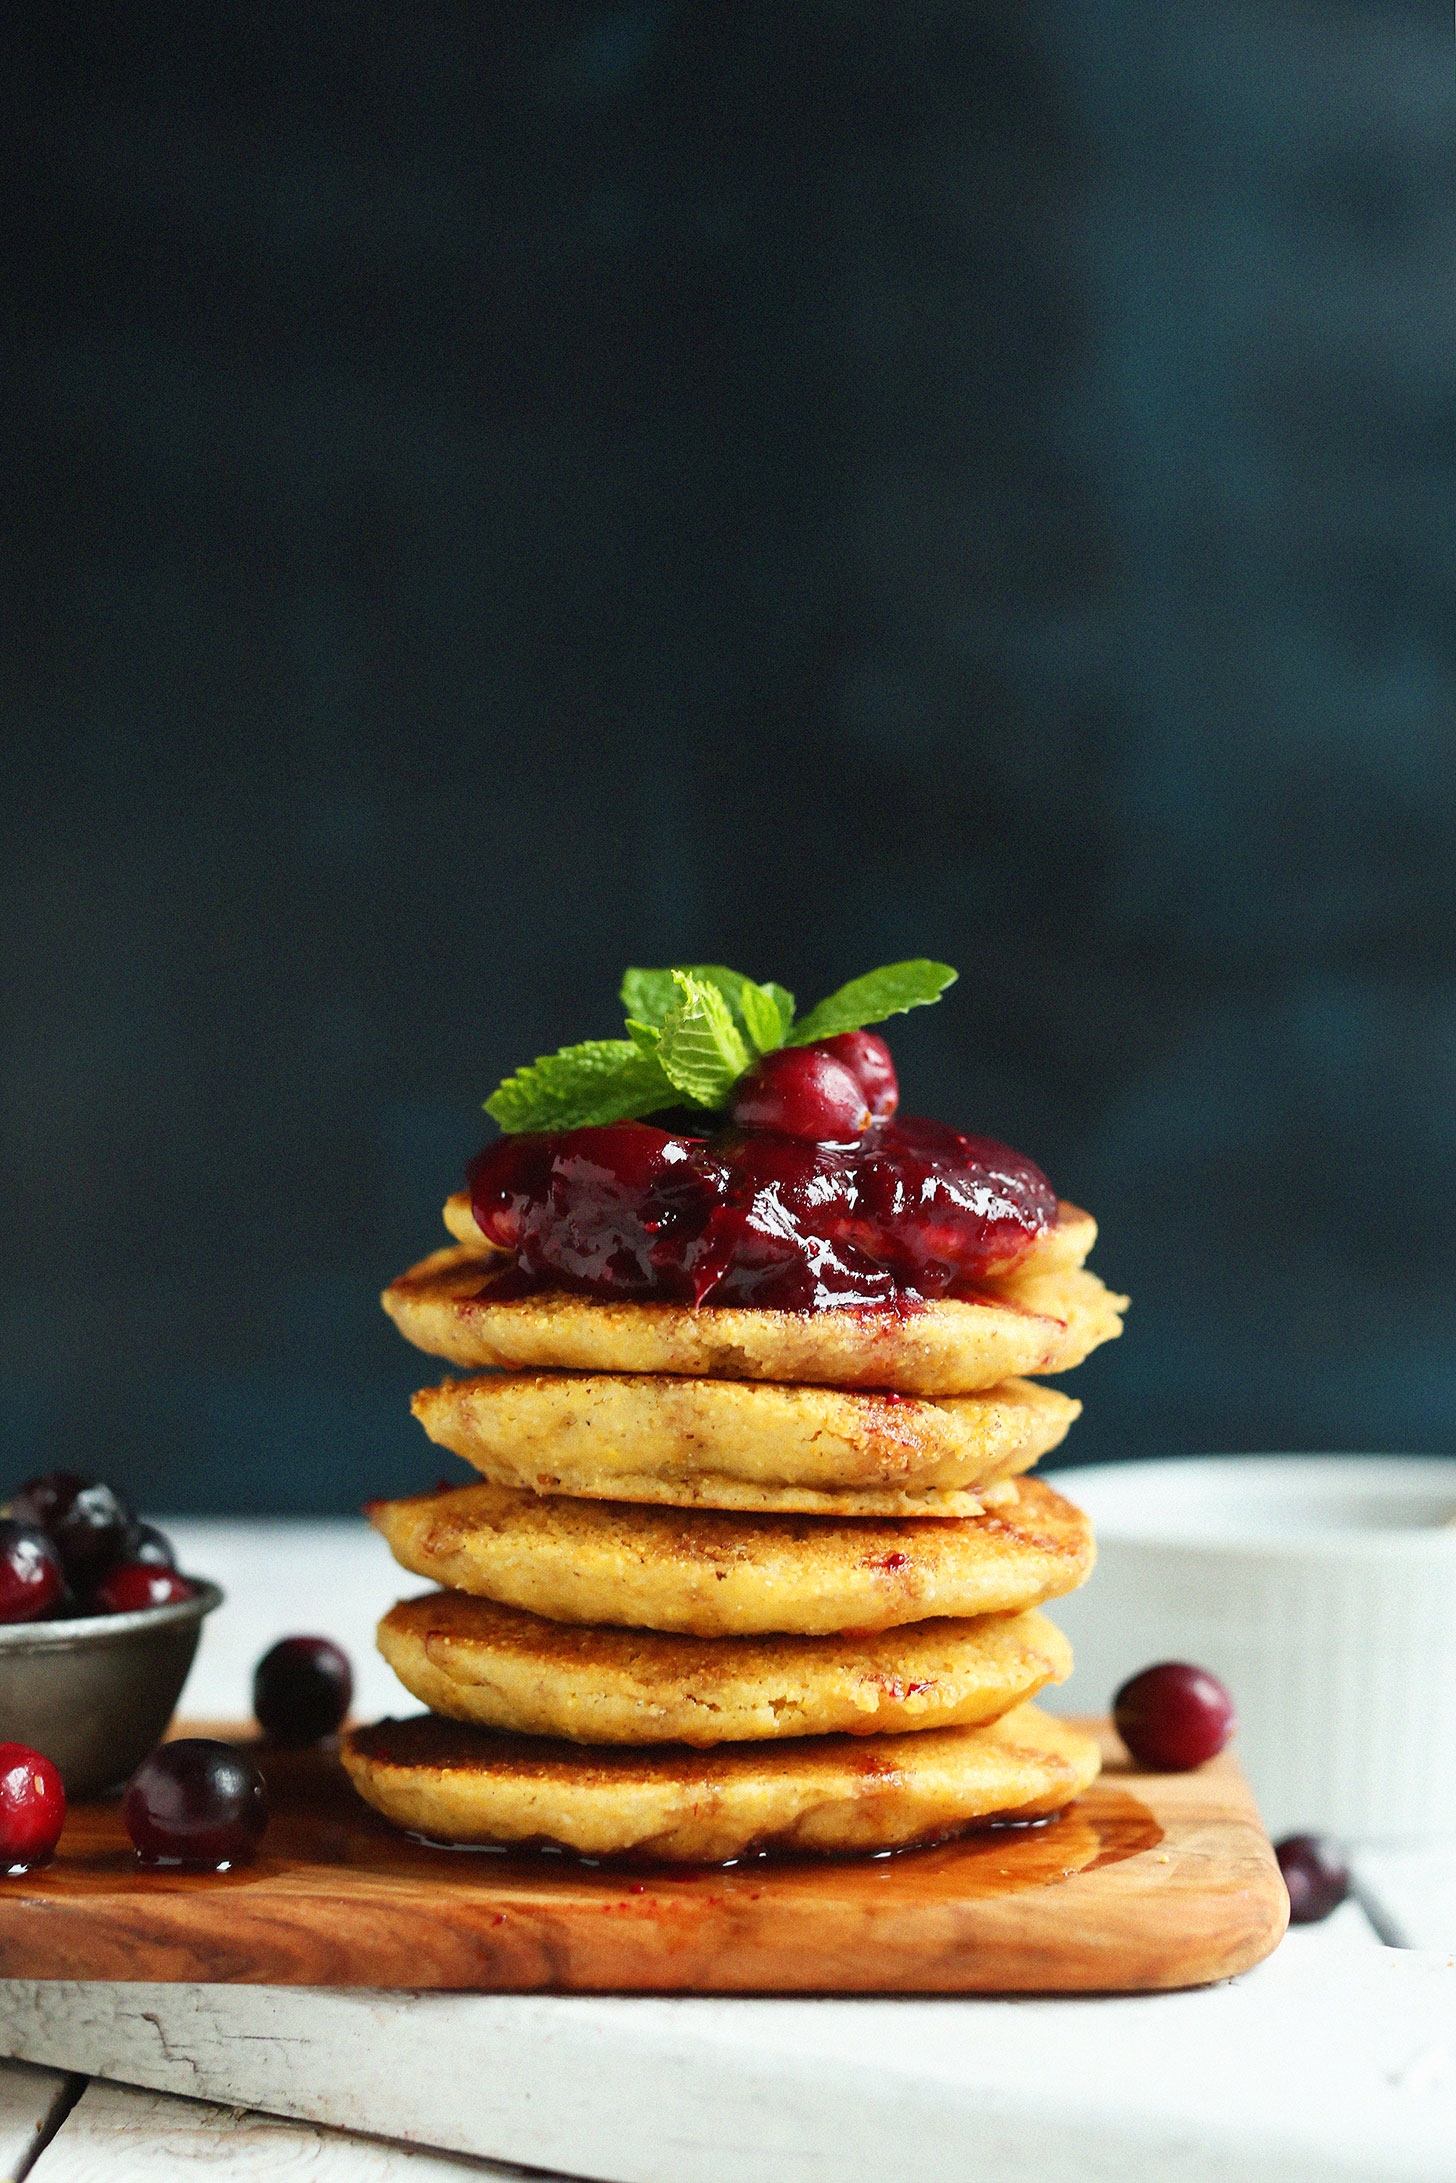 Stack of our gluten-free vegan cornmeal pancakes recipe with cranberry compote